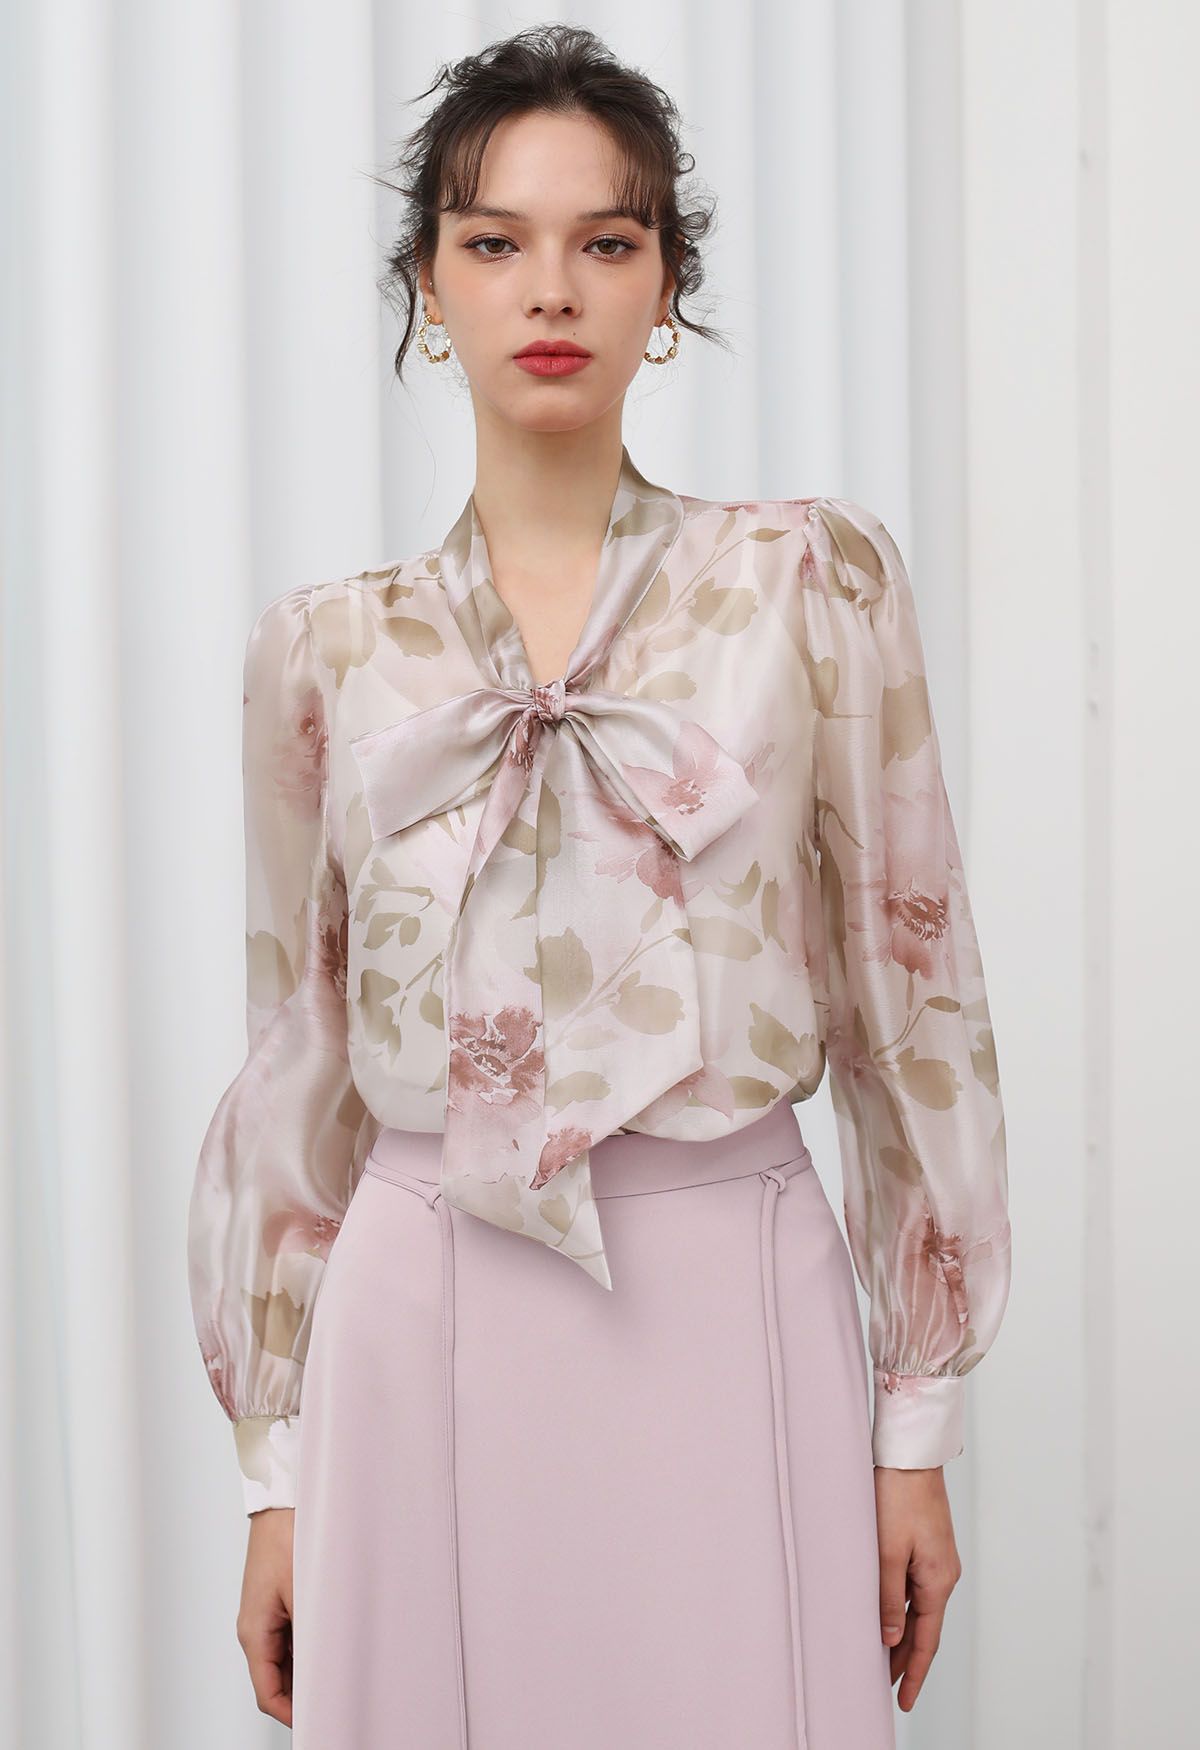 Enthralling Watercolor Floral Bowknot Sheer Shirt in Pink